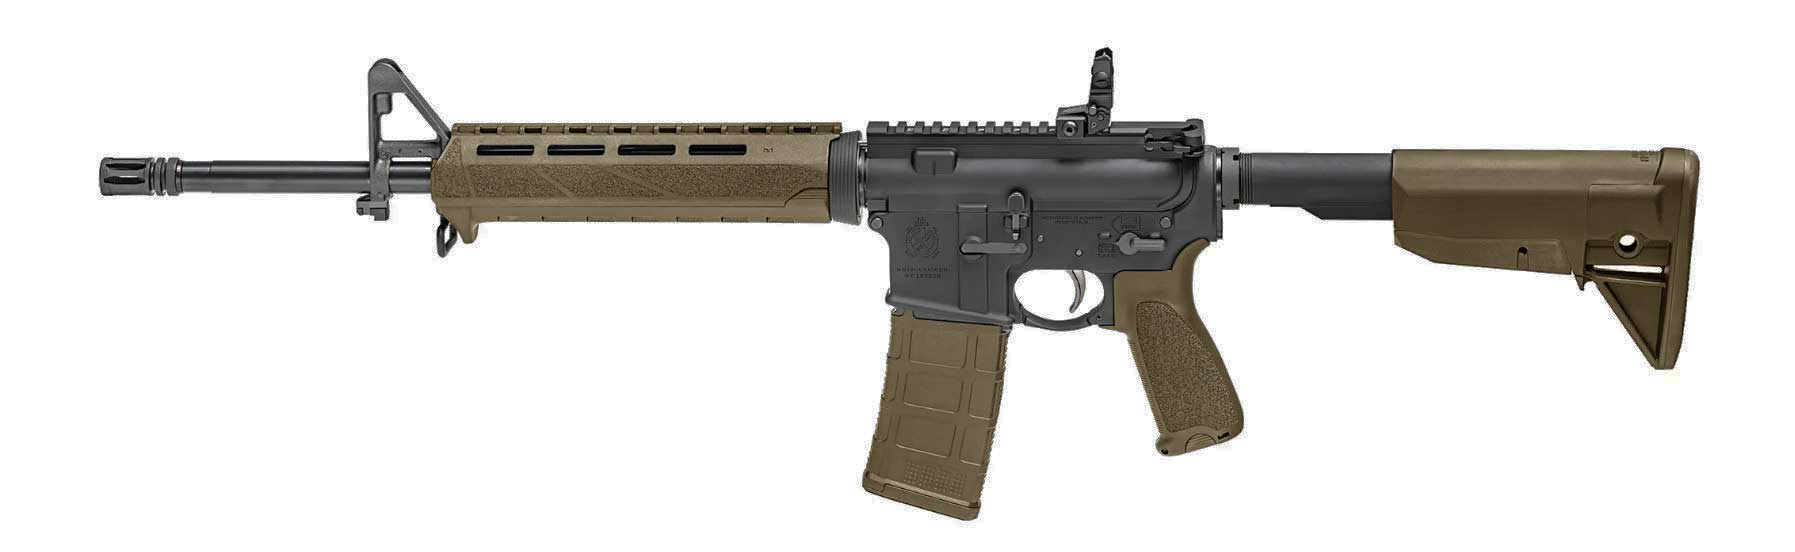 AR 15 Rifle With Magpul Furniture